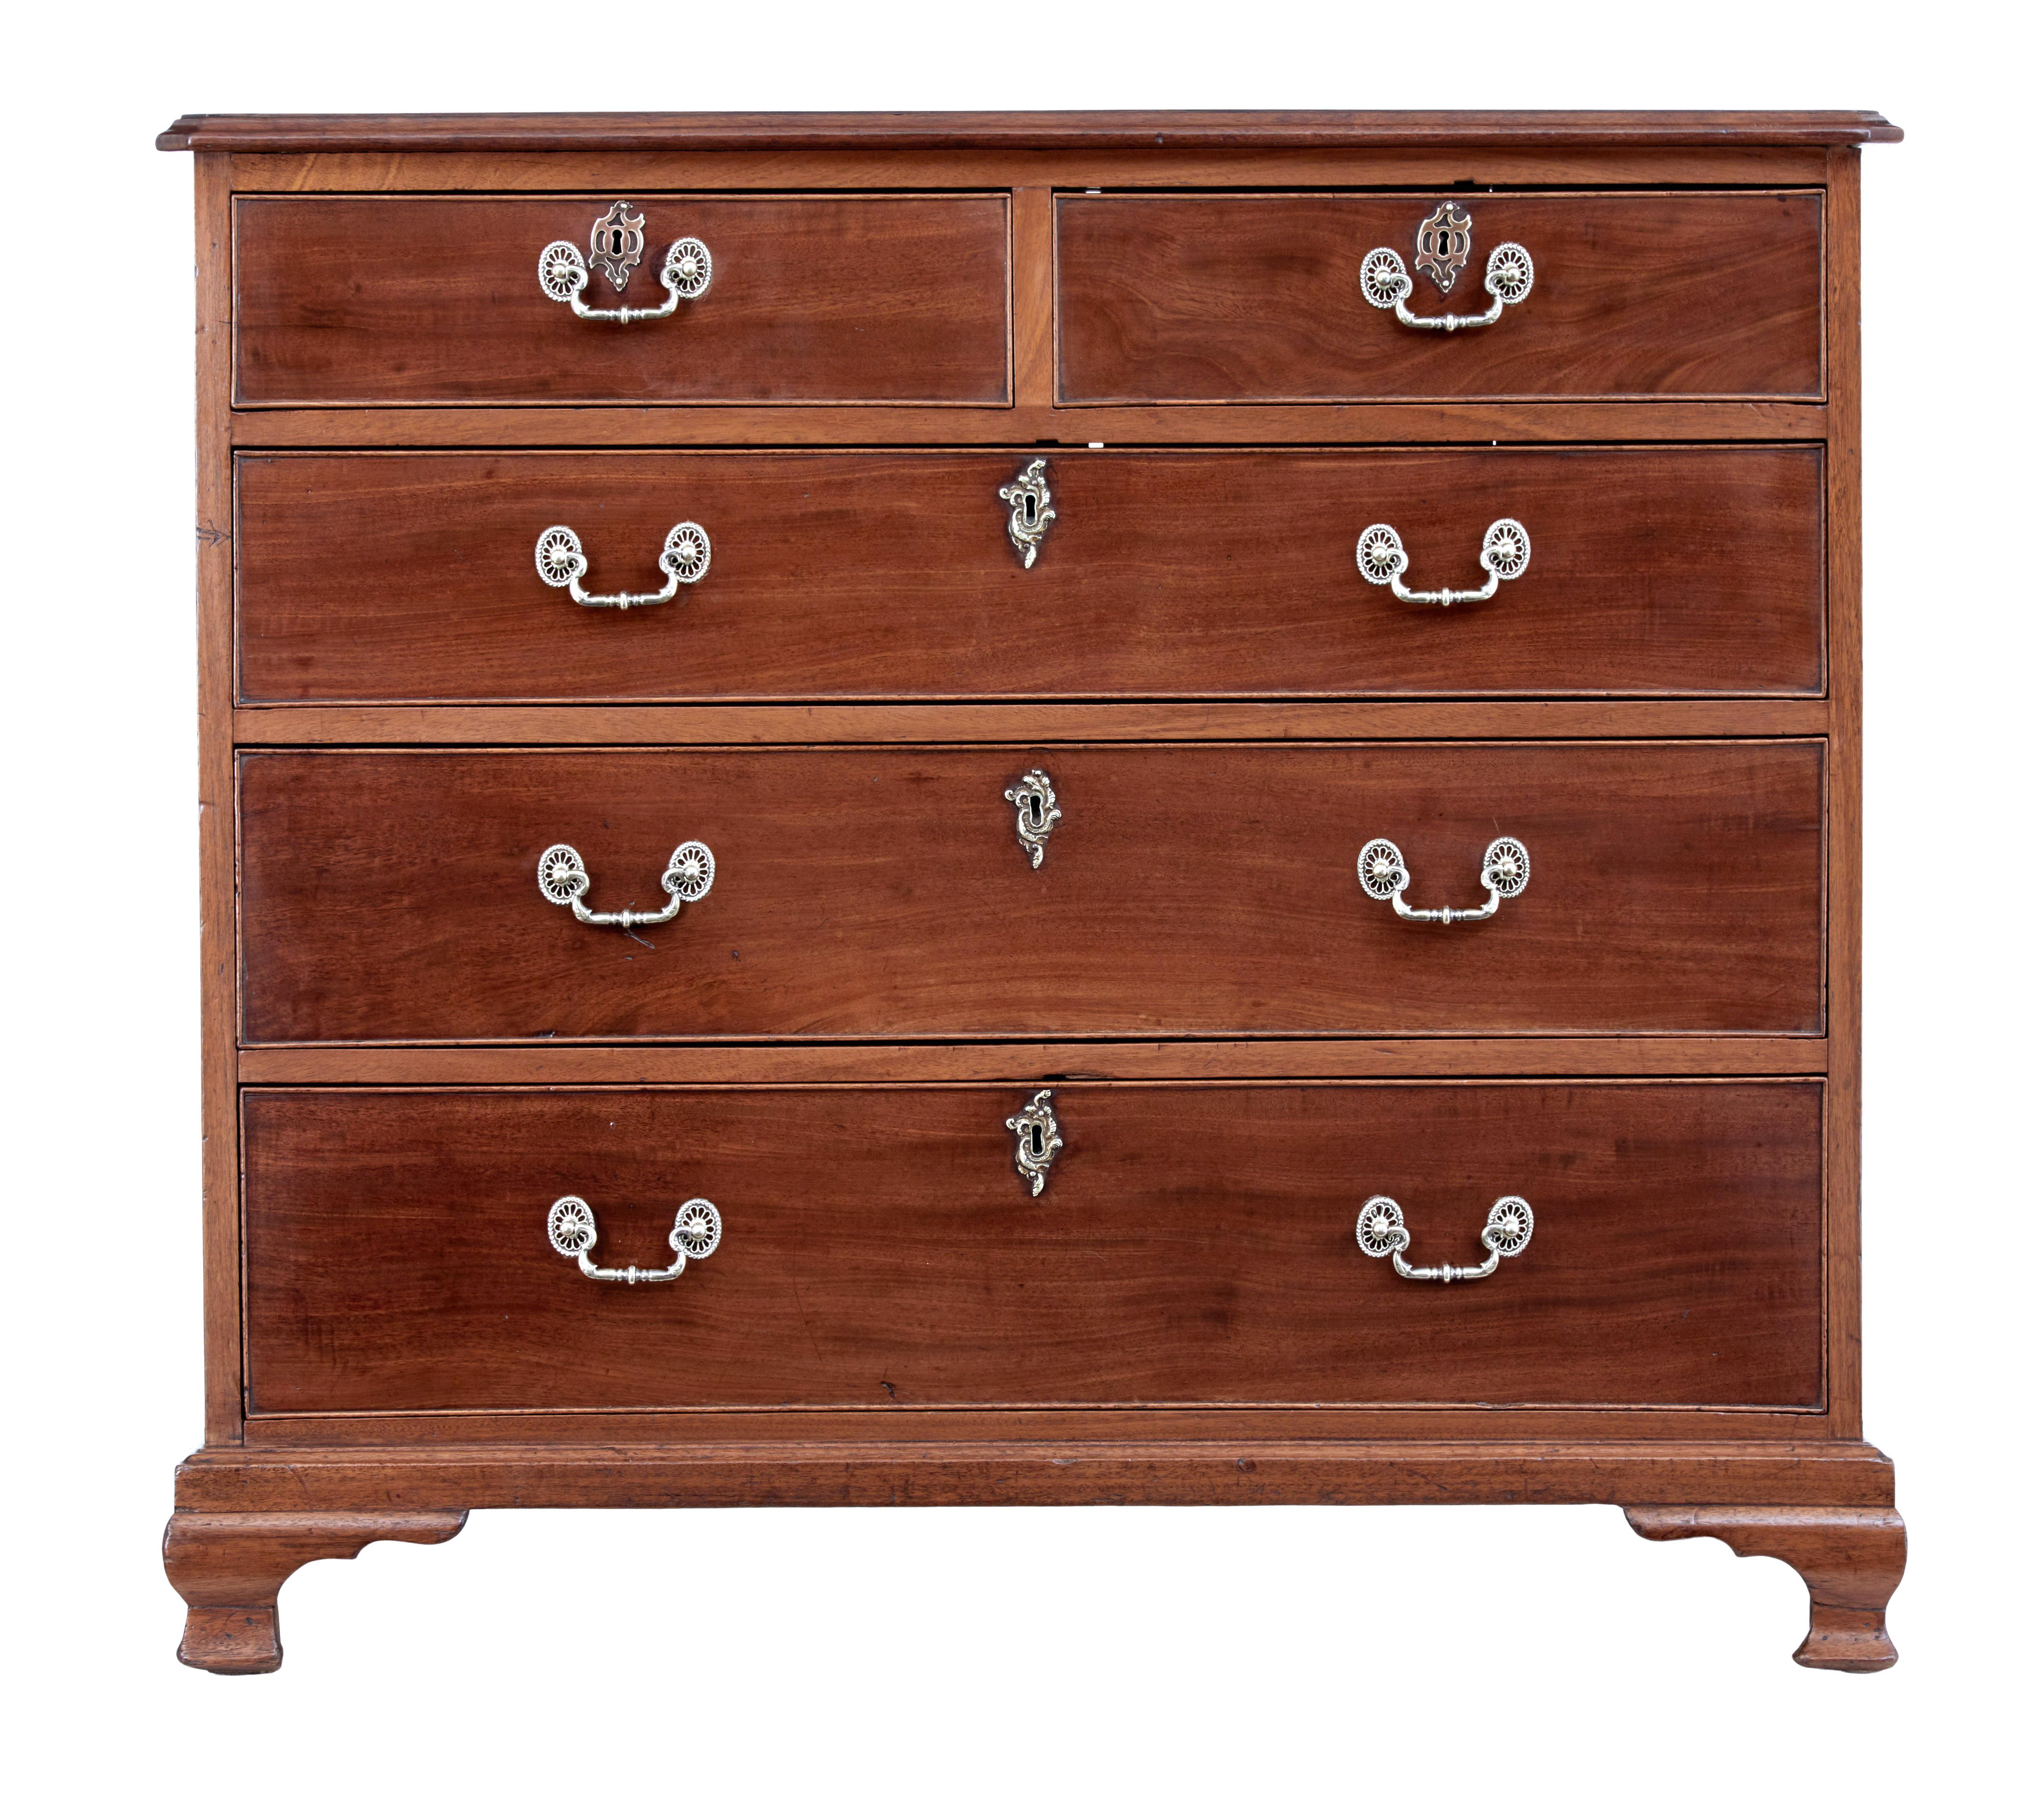 Mid-19th century mahogany chest of drawers, circa 1840.

Functional piece of everyday furniture for the home. 2 over 3 graduating drawers fitted with later ornate handles and escutcheons. Drawer fronts with original cock beaded edge.

Standing